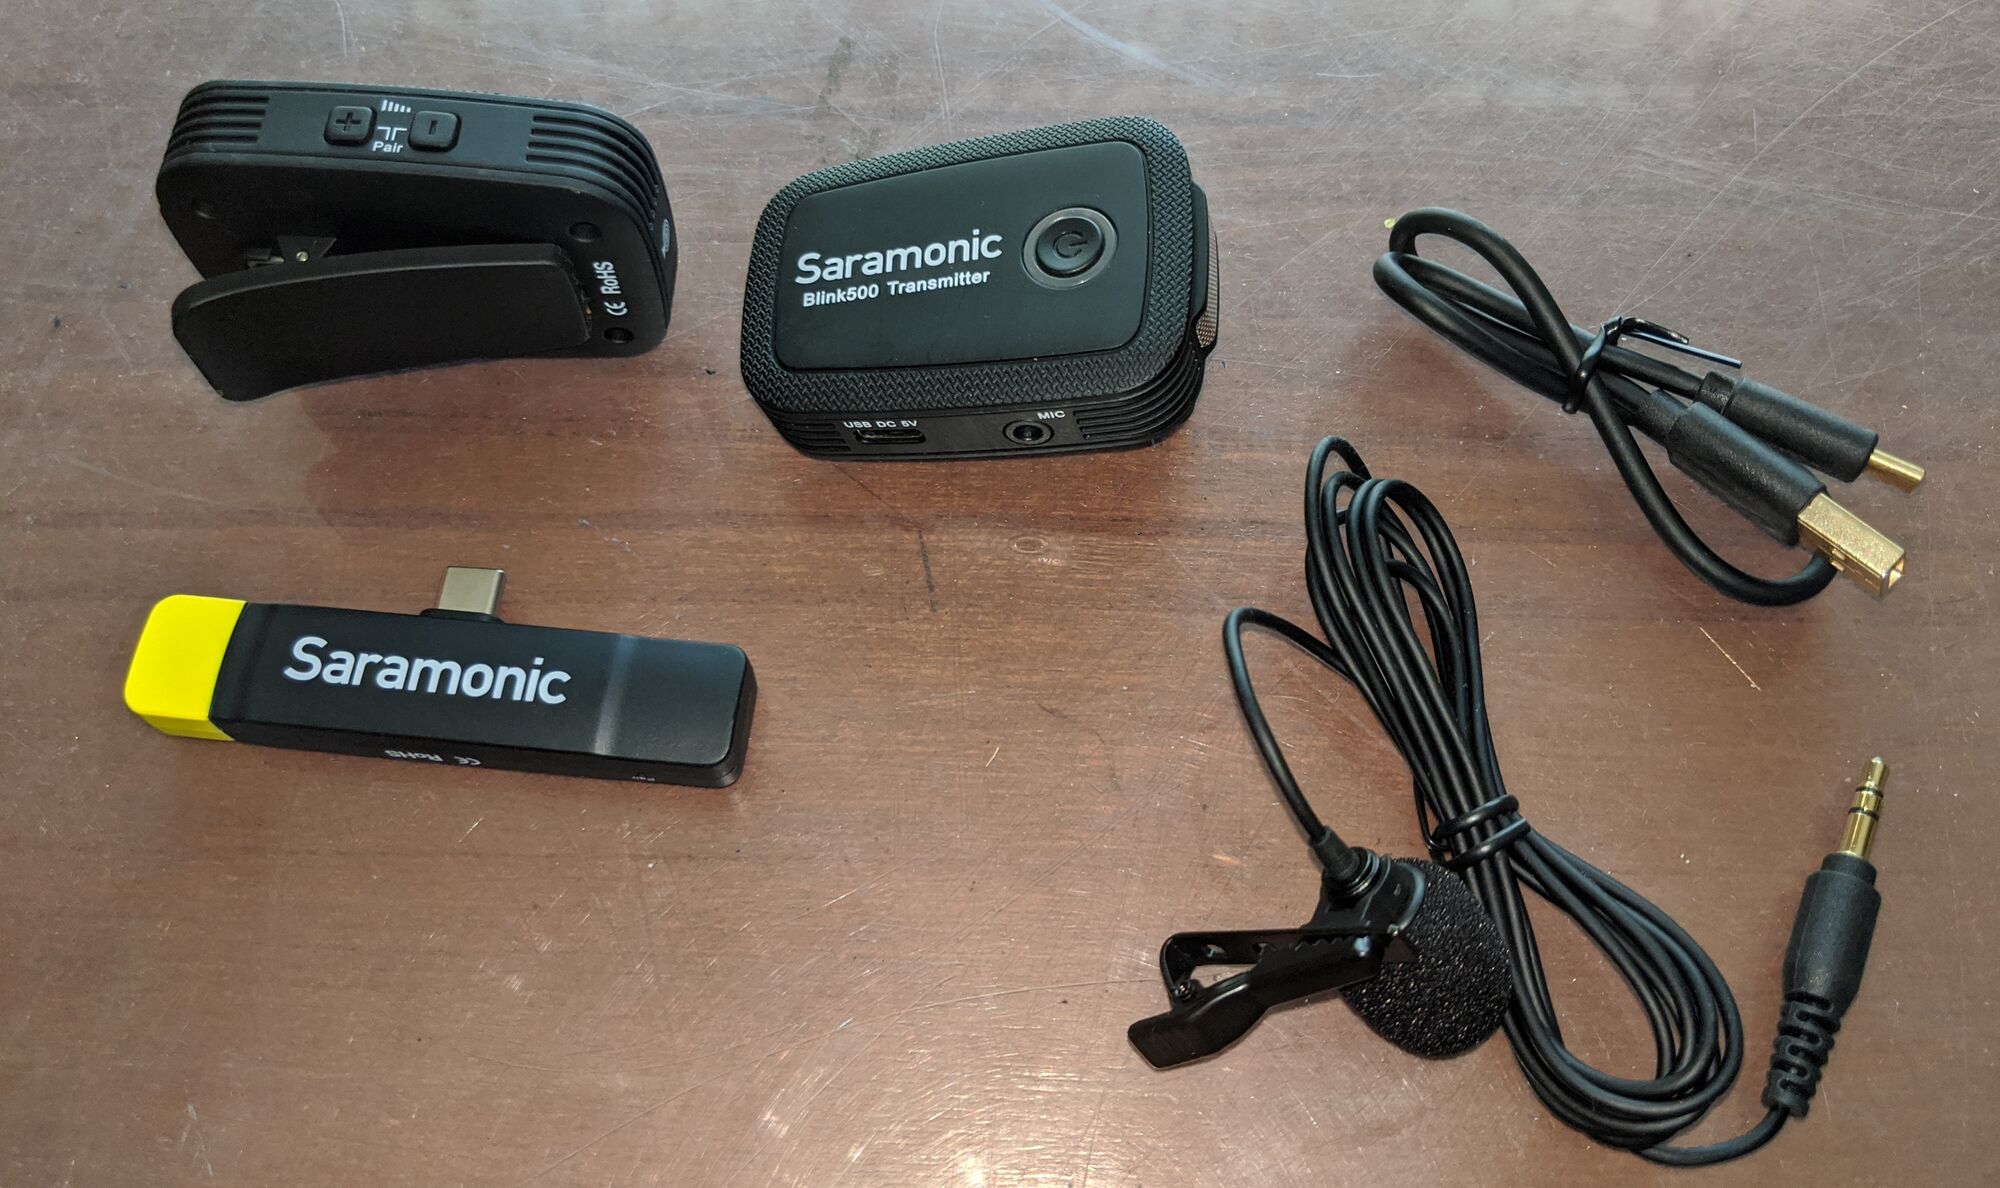 Saramonic Blink500 B6 - 2 wireless Transmitters and 1 wireless receiver, Seen in picture 1 Label Microphone and 1 USB-C charging cable but the package ships with two of them each.